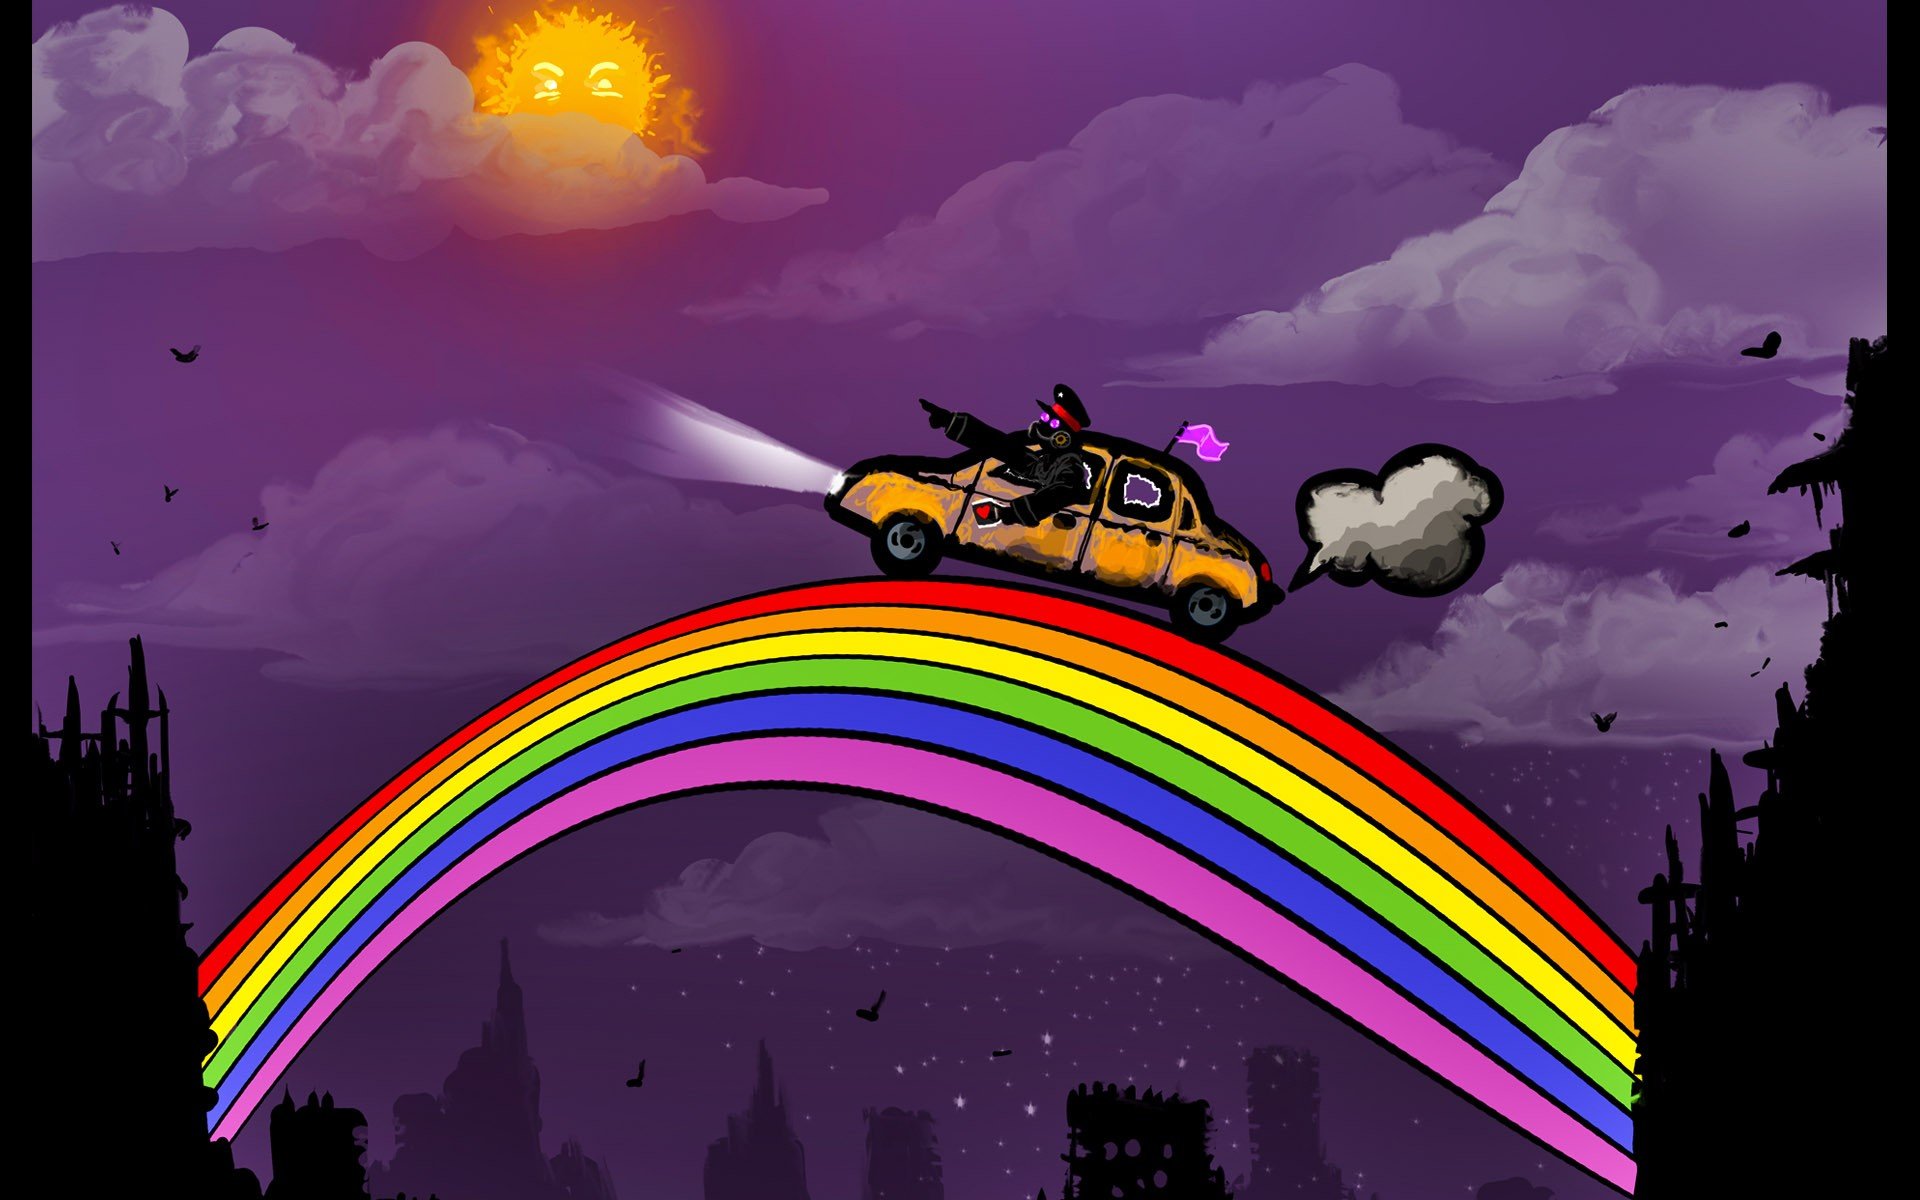 paintings, Cars, Psychedelic, Fantasy, Art, Rainbows, Ride, Digital, Art, Drawings, Airbrushed, Romantically, Apocalyptic, Vitaly, S, Alexius Wallpaper